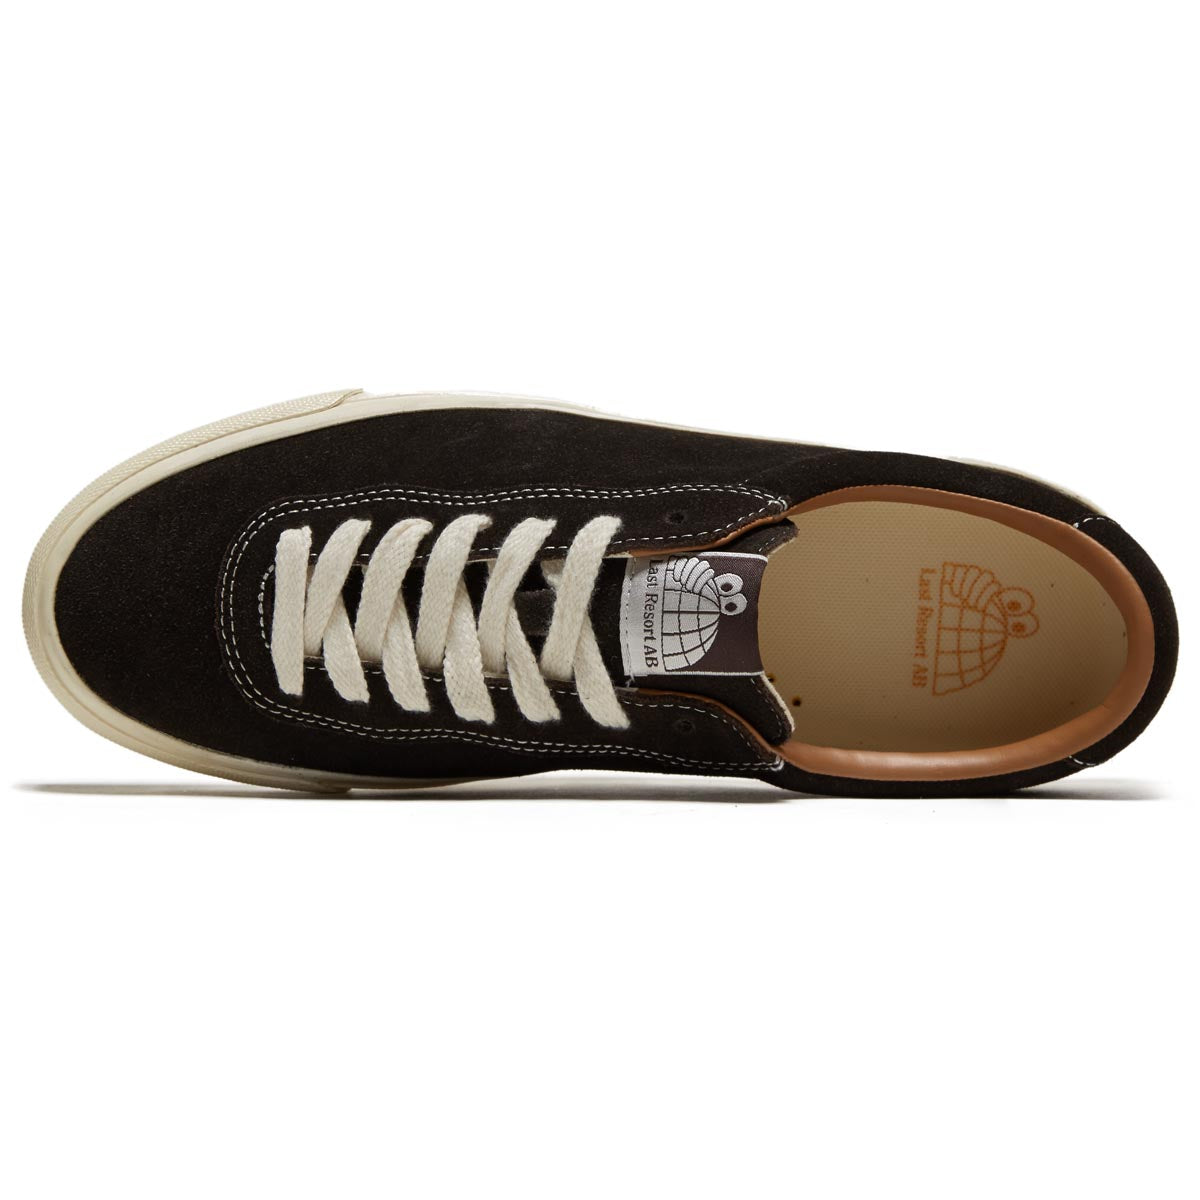 Last Resort AB VM001 Suede Lo Shoes - Coffee Bean/White image 3